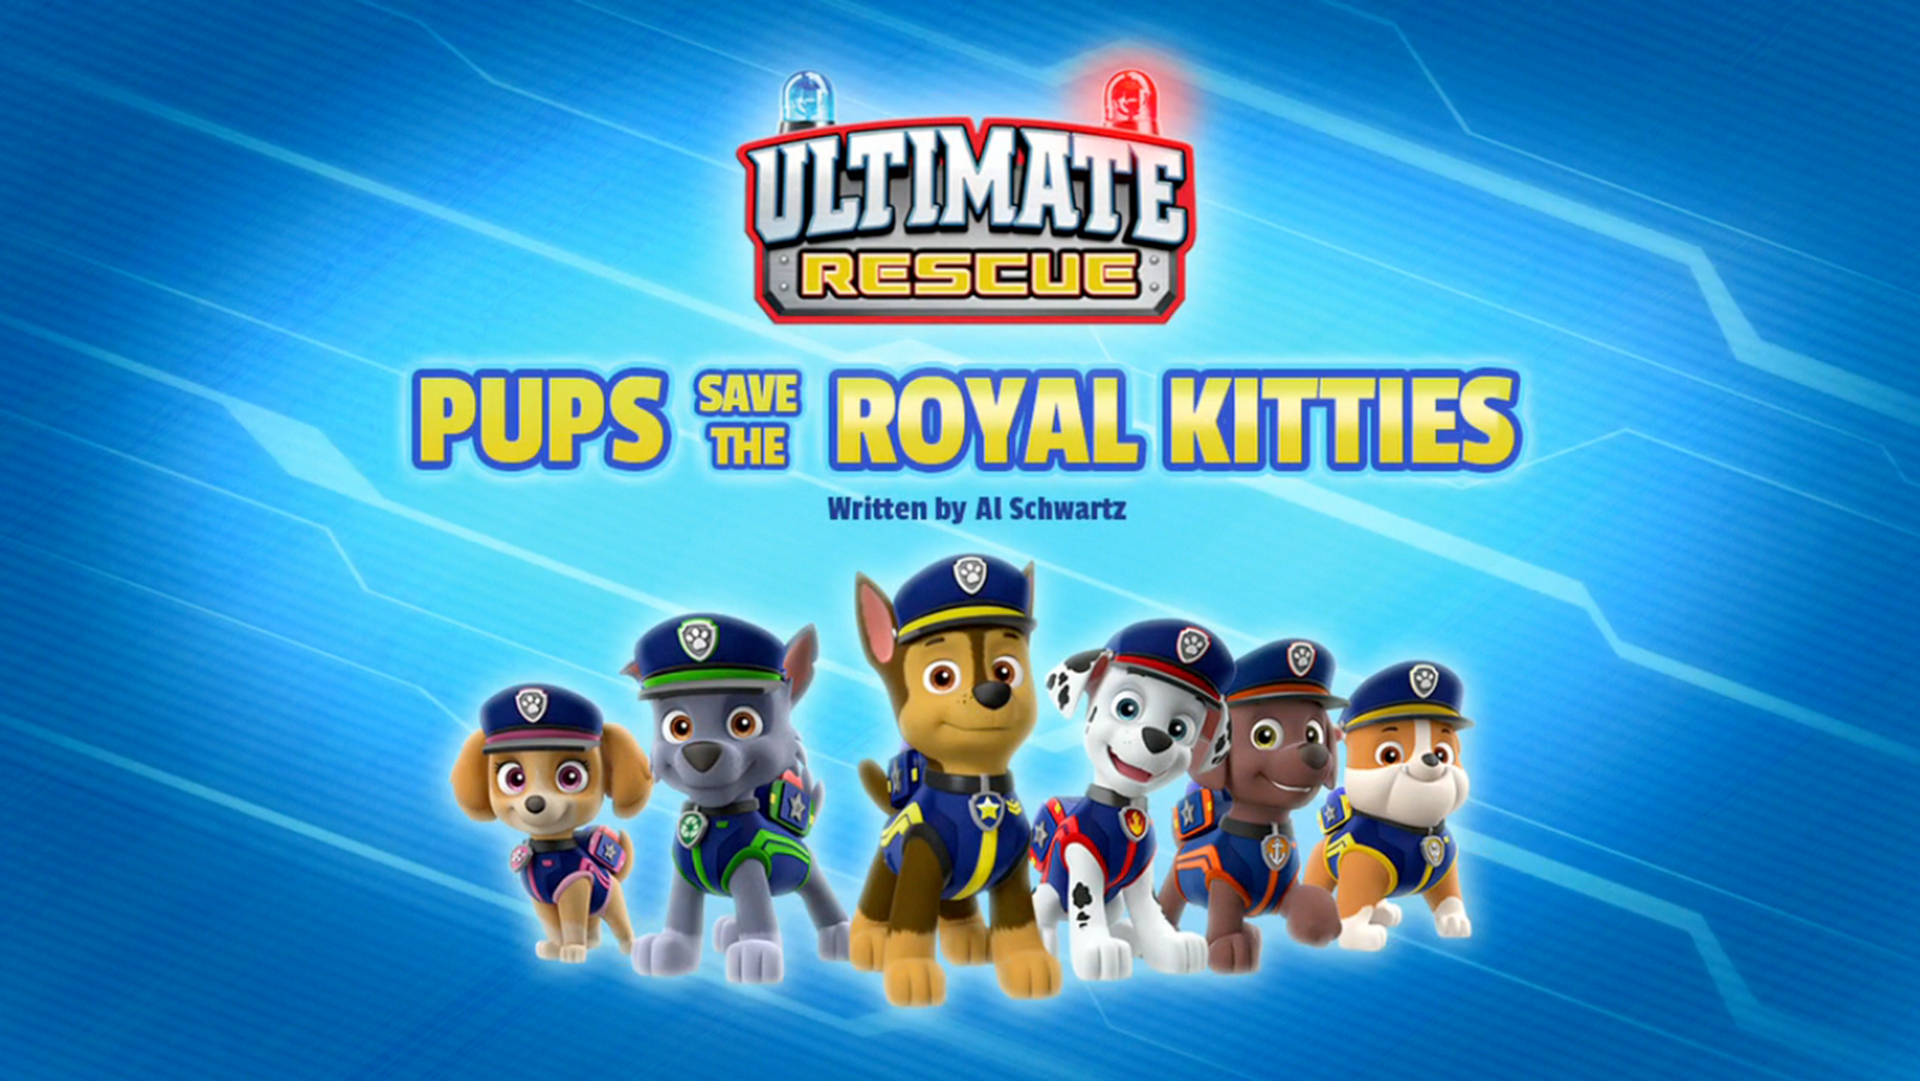 paw patrol ryder ultimate rescue